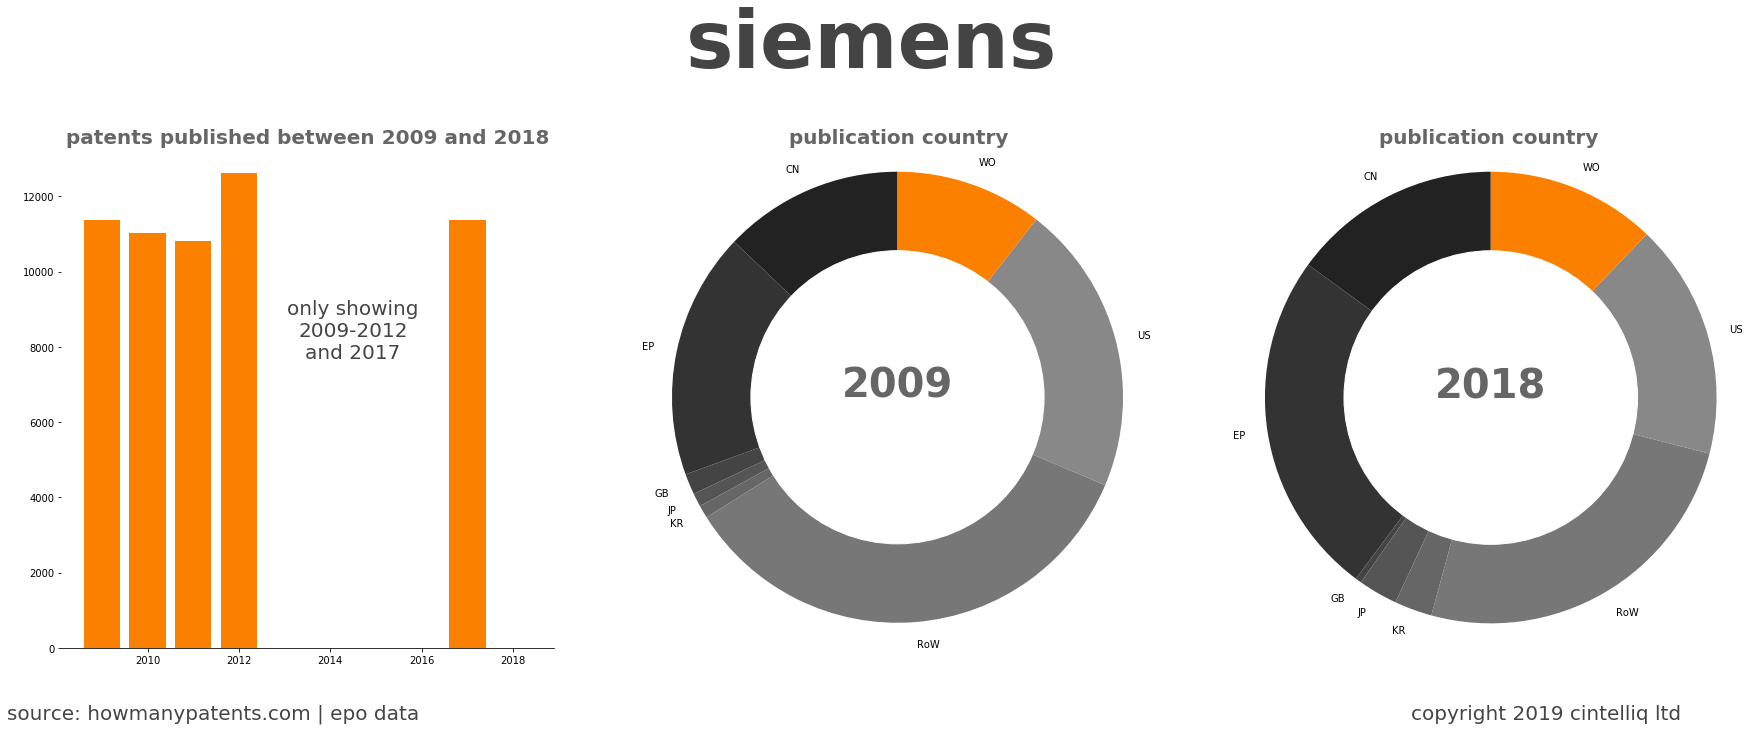 summary of patents for Siemens